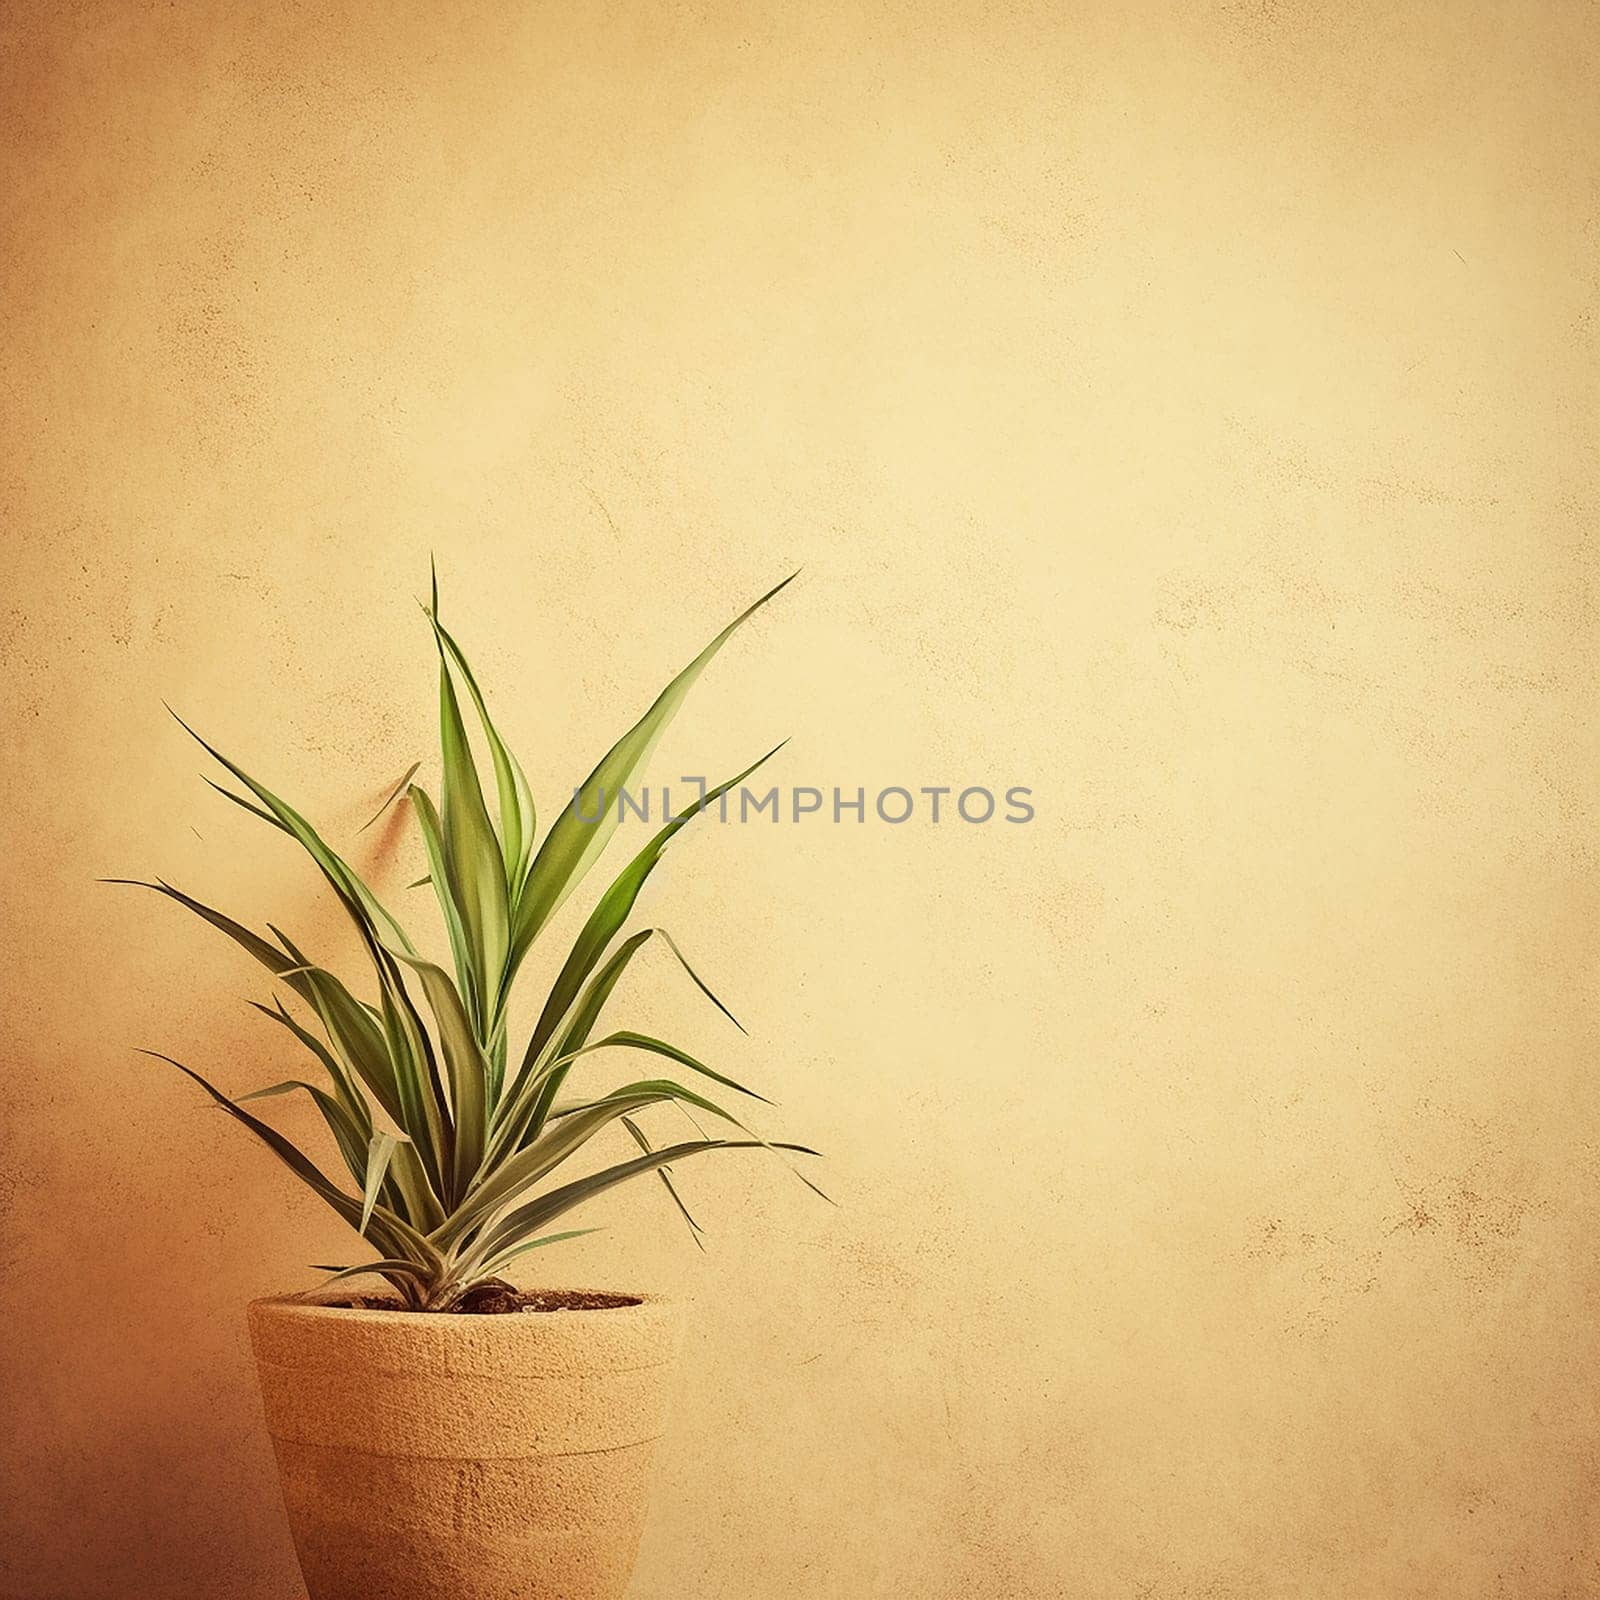 A potted plant against a textured beige wall.